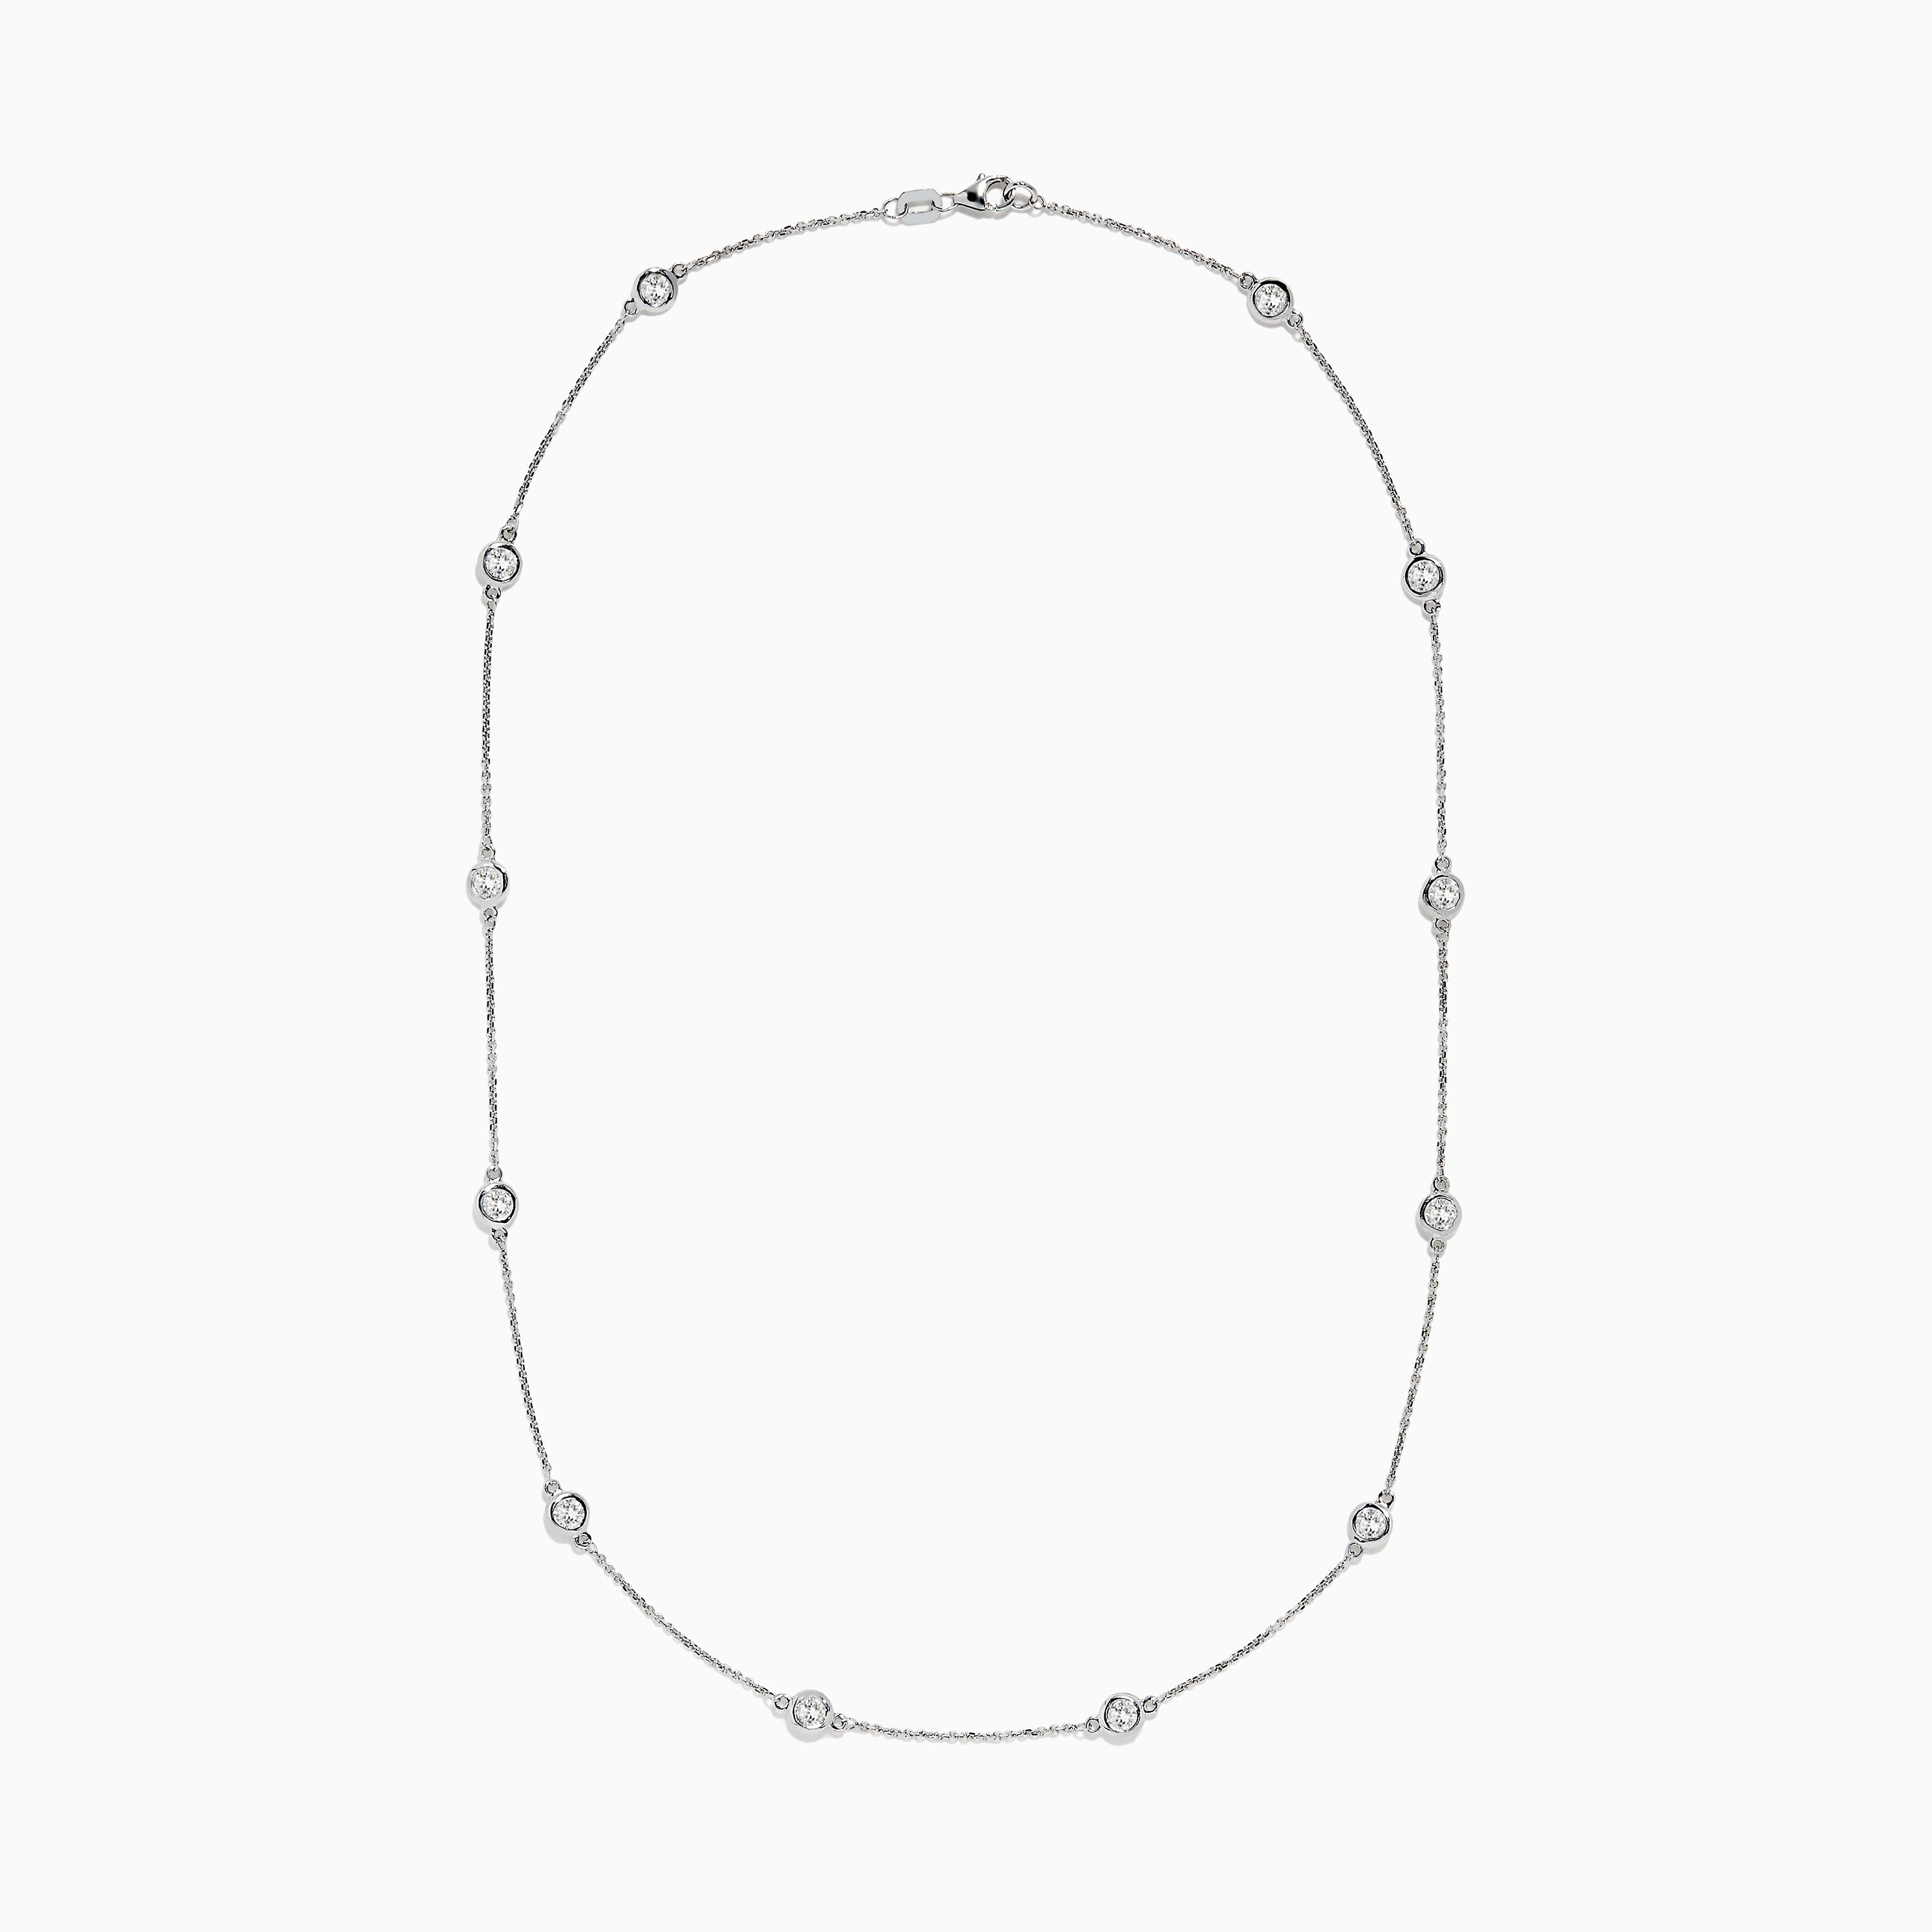 Pave Classica 14K White Gold Diamond Station Necklace, 1.50 TCW ...